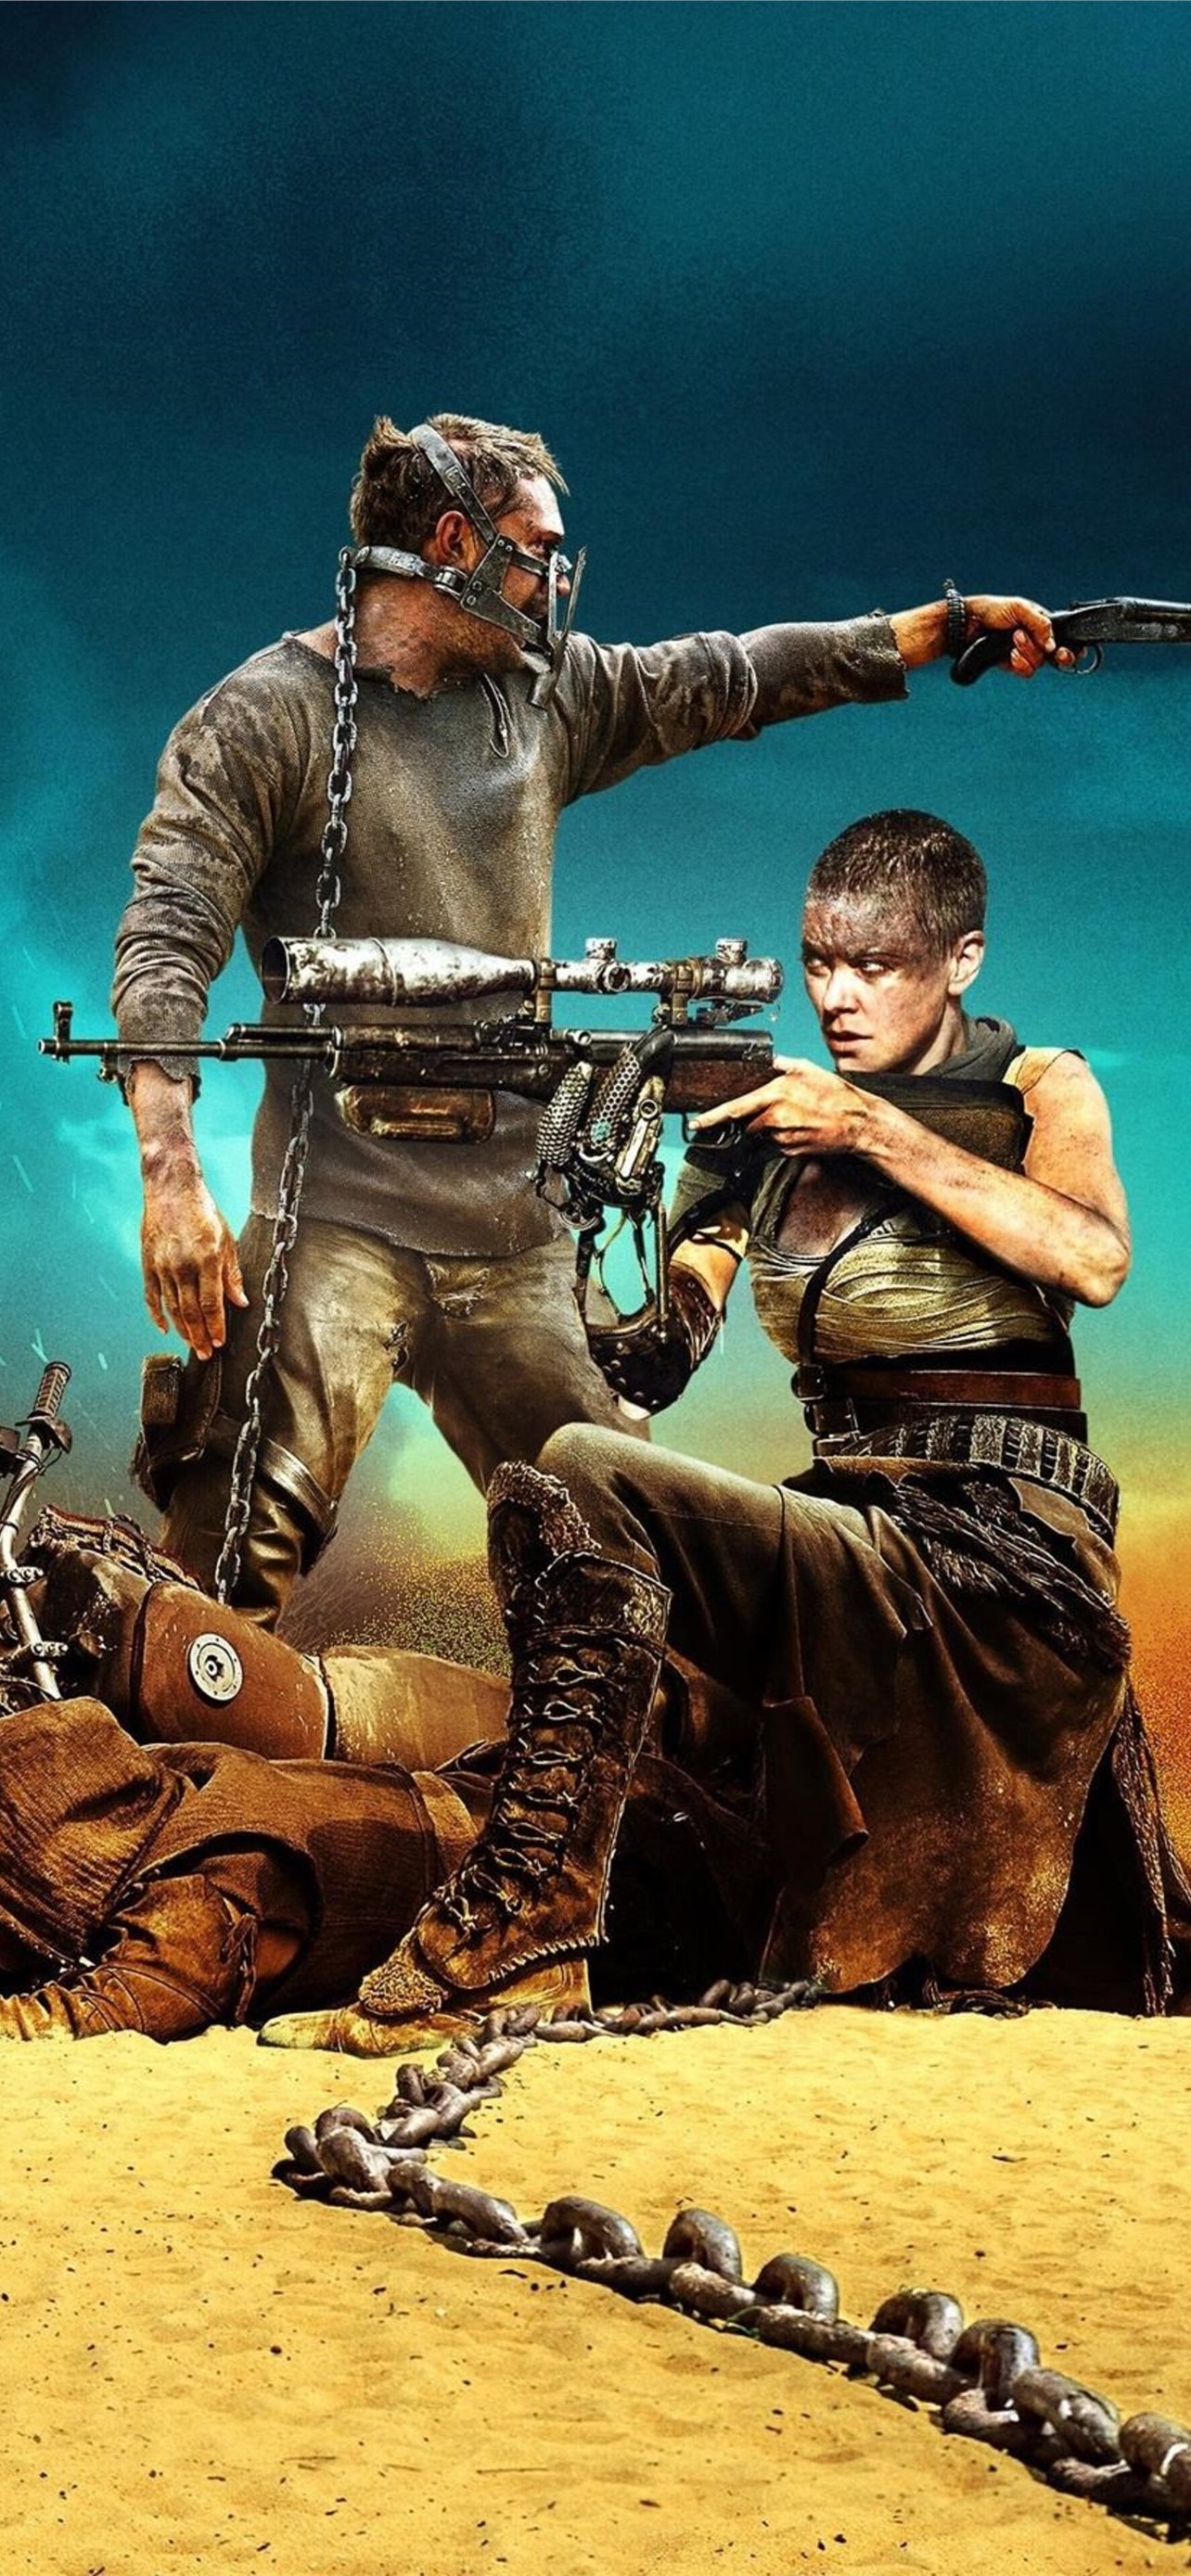 Akhuratha Poster Movie Mad Max: Fury Road HD Wallpaper Background Fine Art  Print - Movies posters in India - Buy art, film, design, movie, music,  nature and educational paintings/wallpapers at Flipkart.com